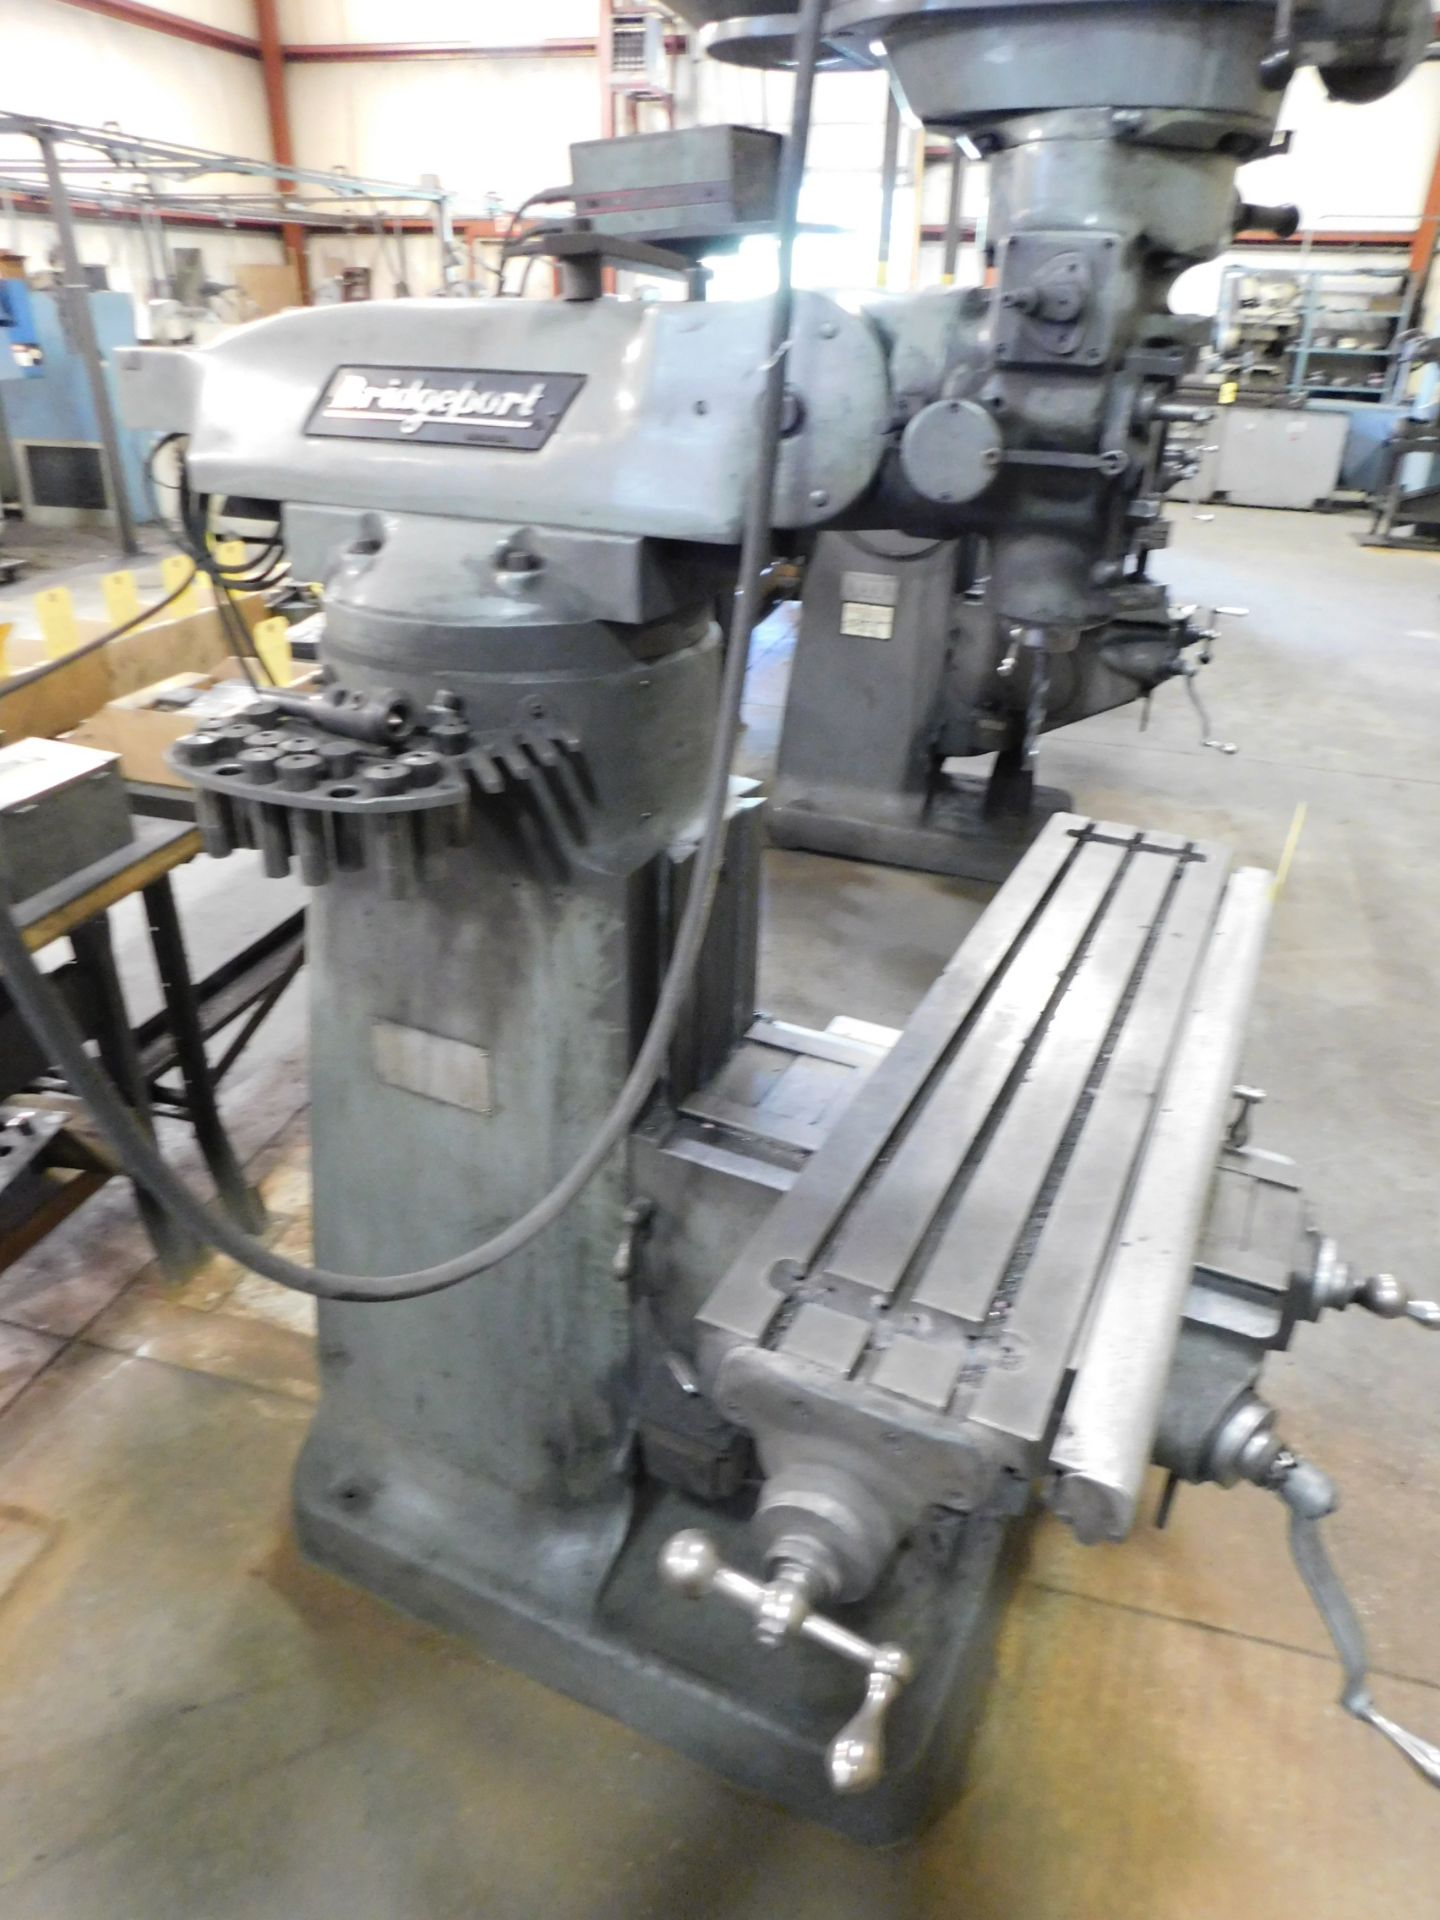 Bridgeport Series I, 2 HP Vertical Mill, s/n 12BR239284, 9” X 42” Table, Accurite D.R.O. - Image 5 of 11